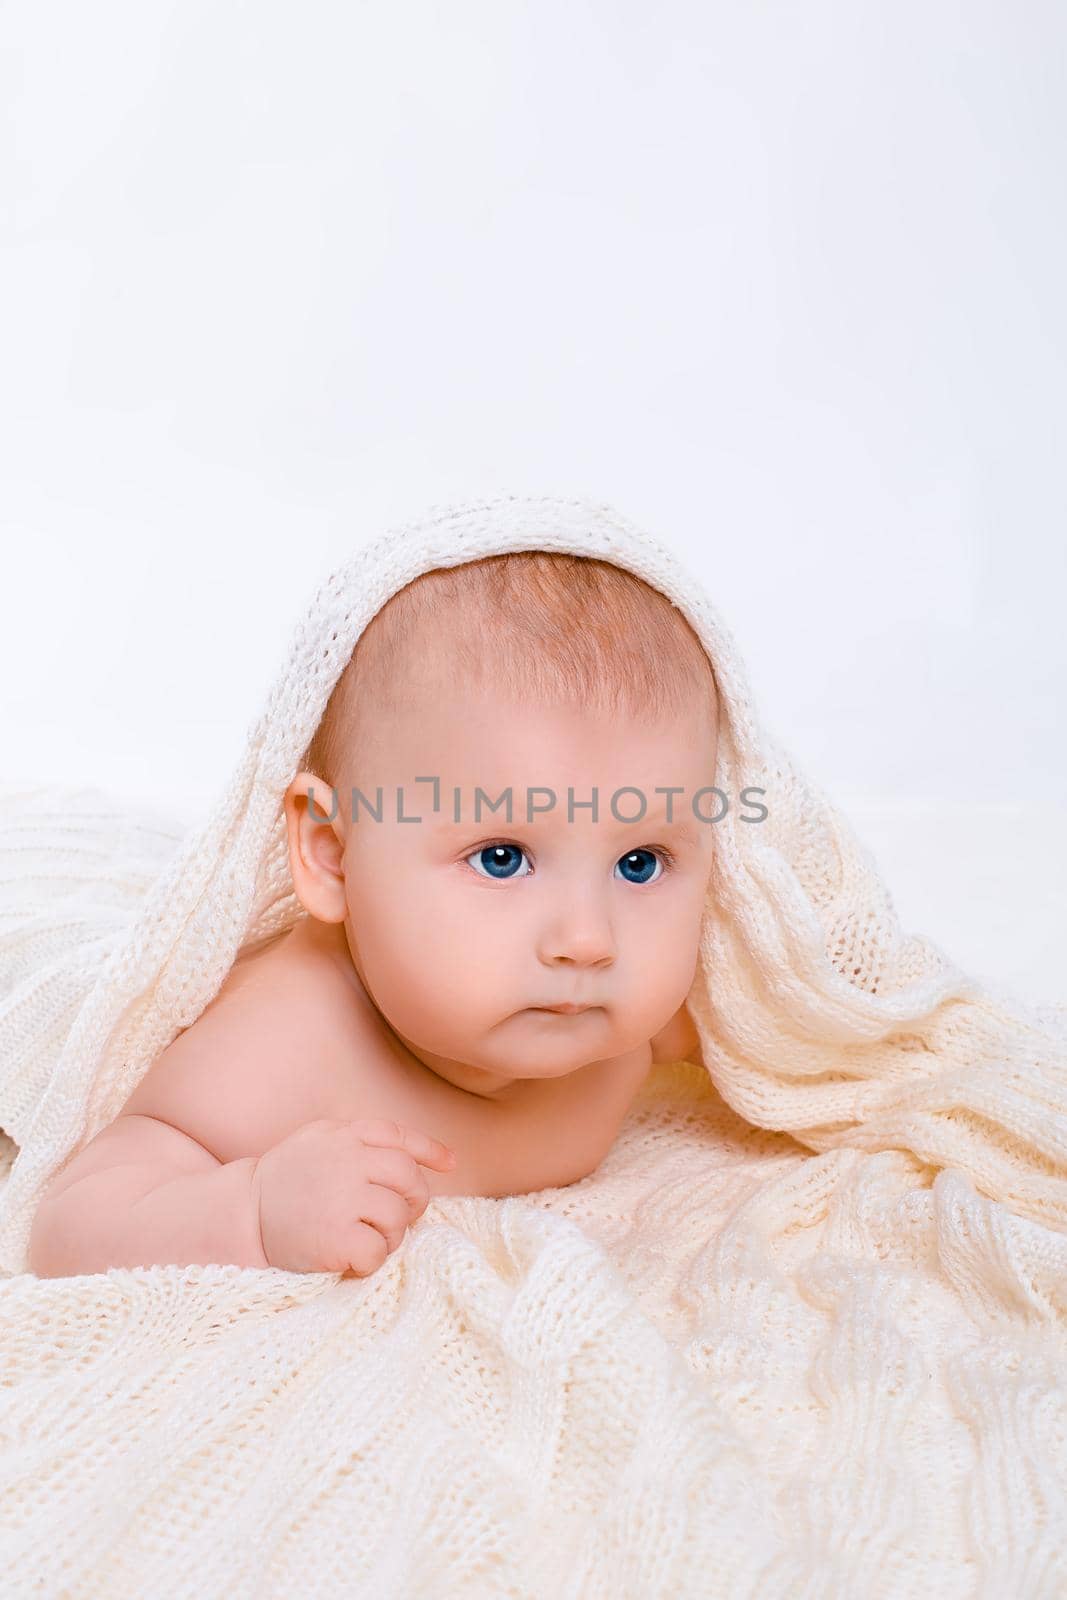 Cute baby girl on white background with isolation. Baby with a towel on his head